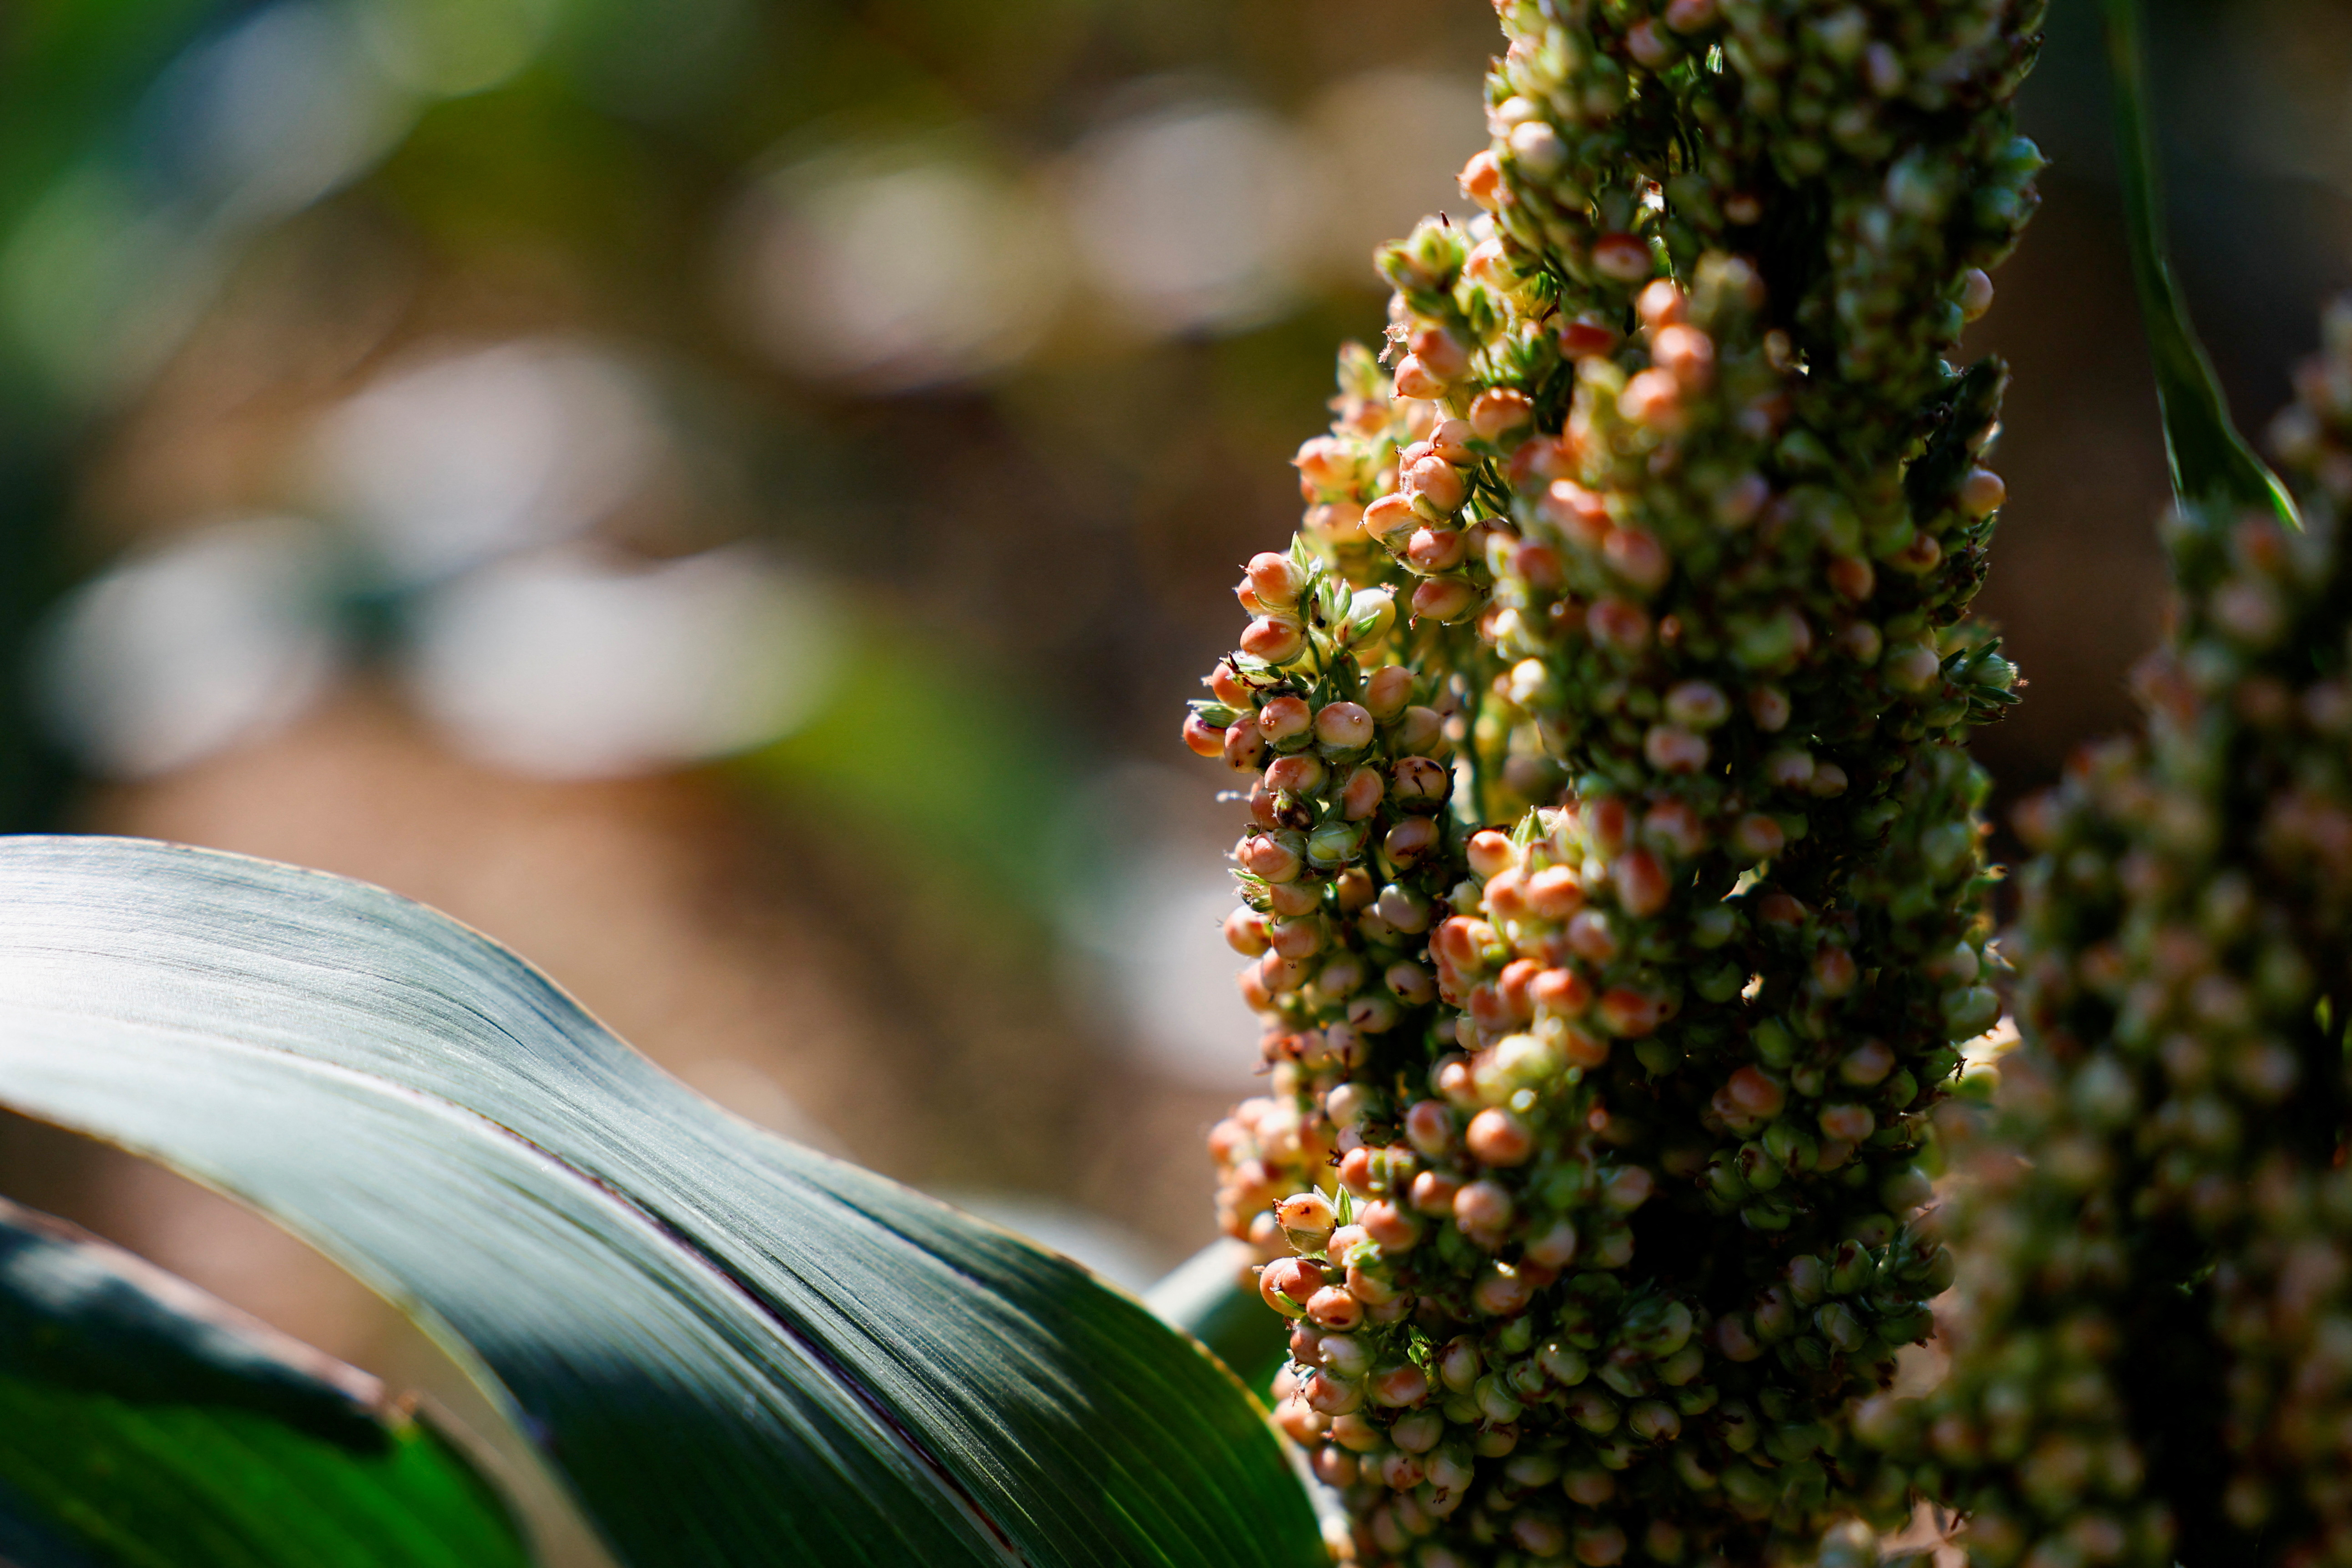 French farmer grows sorghum plants to adapt to climate change